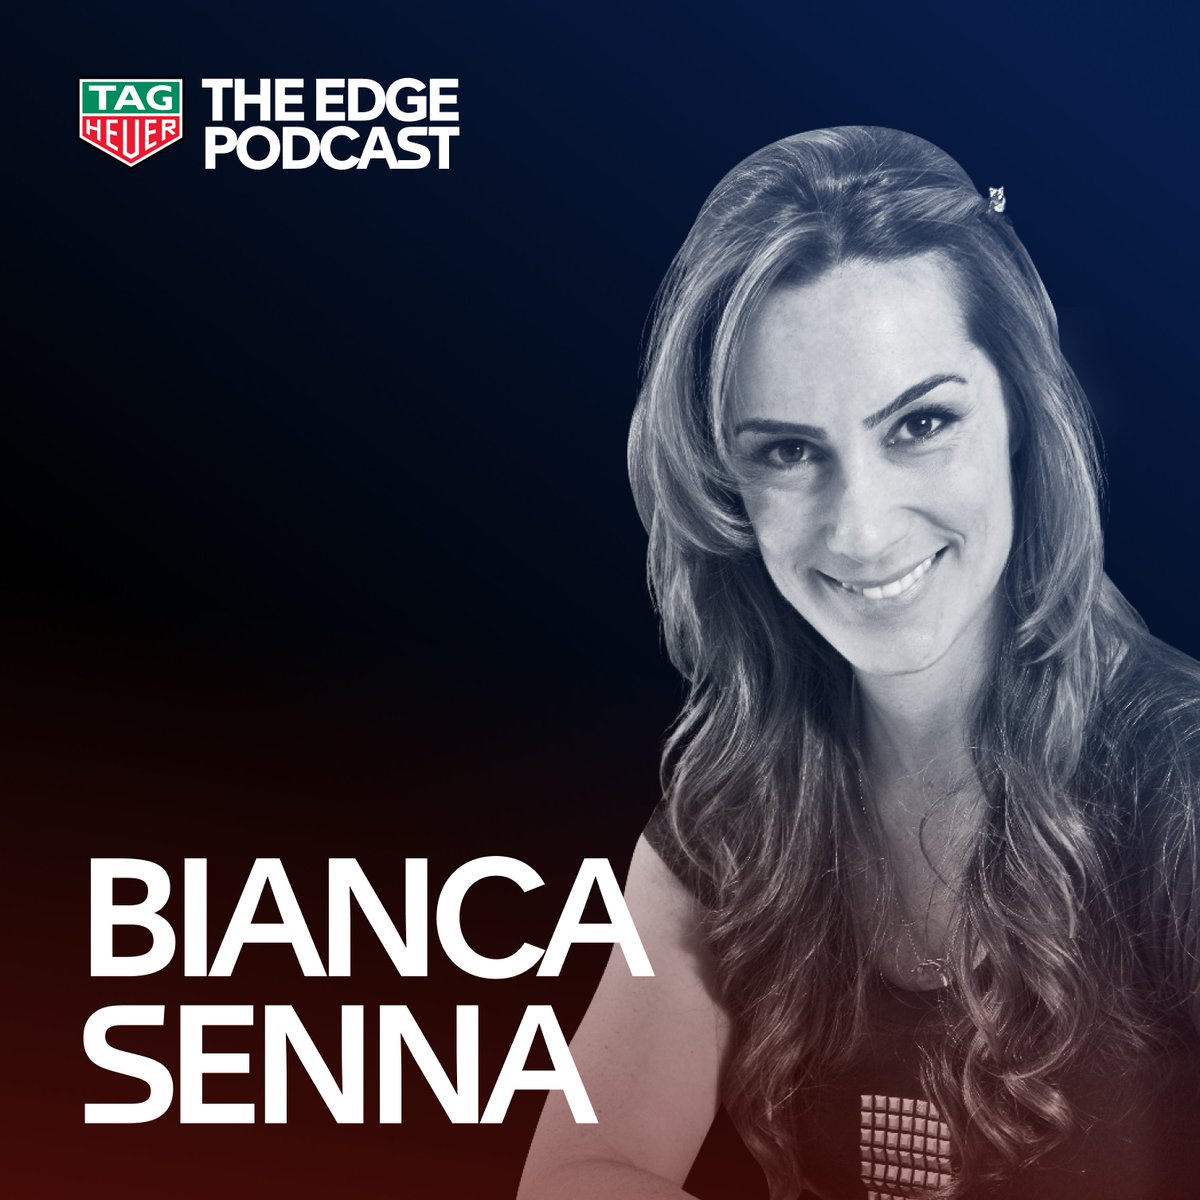 In this new episode of #TheEdge, Bianca Senna, @ayrtonsenna's niece, tells us about the origins of the Ayrton Senna Institute and who he was beyond the helmet, beyond the name.

Listen to the full podcast at: tag.hr/BiancaSenna

#TAGHeuer #AyrtonSenna #RememberSenna…